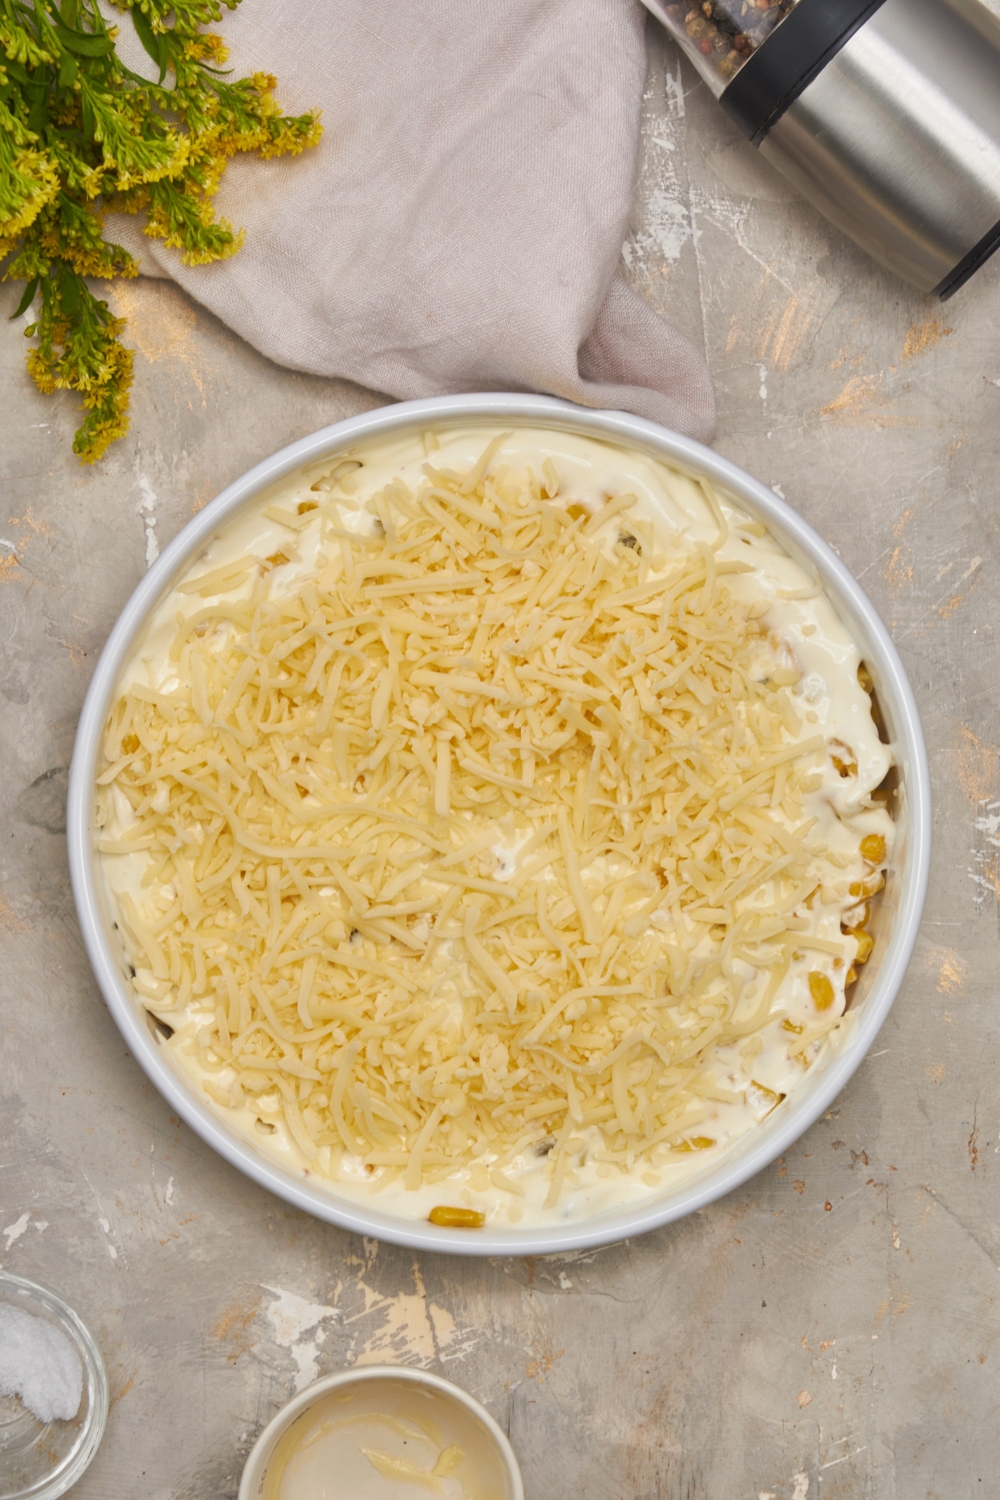 A white round baking dish filled with unbaked corn casserole and a pile of shredded cheese sprinkled on top of it.